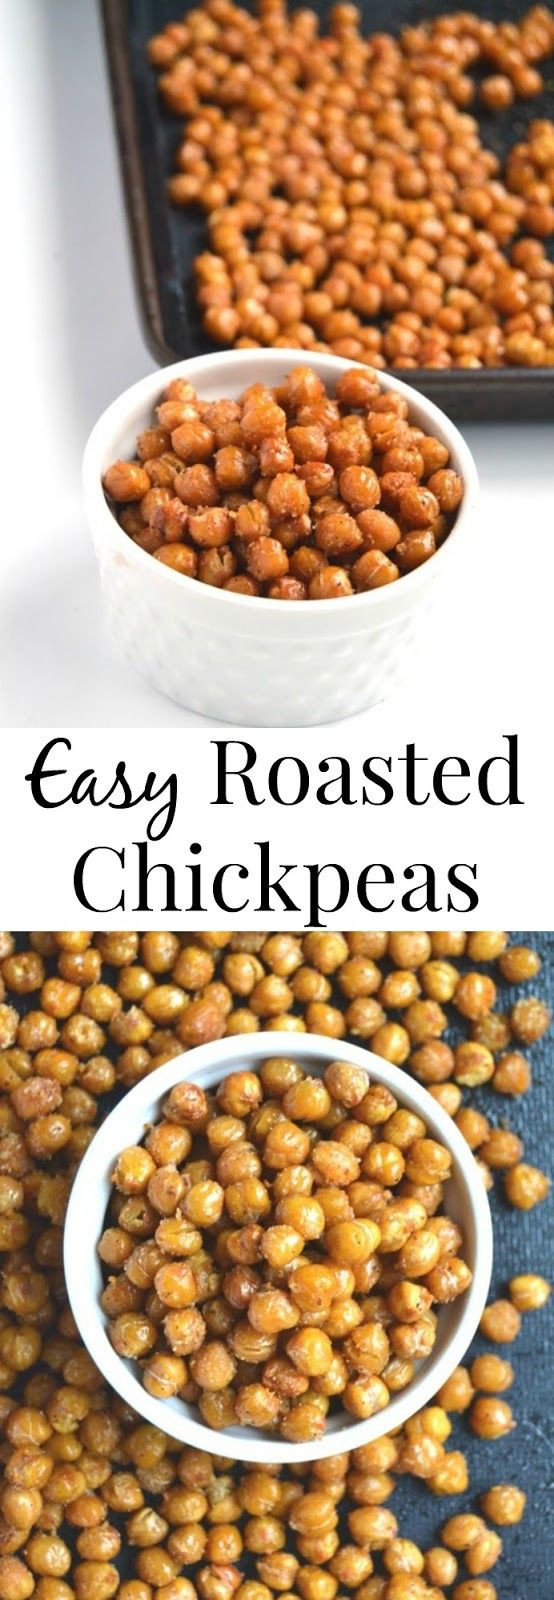 Healthy And Filling Snacks
 Roasted Chickpeas